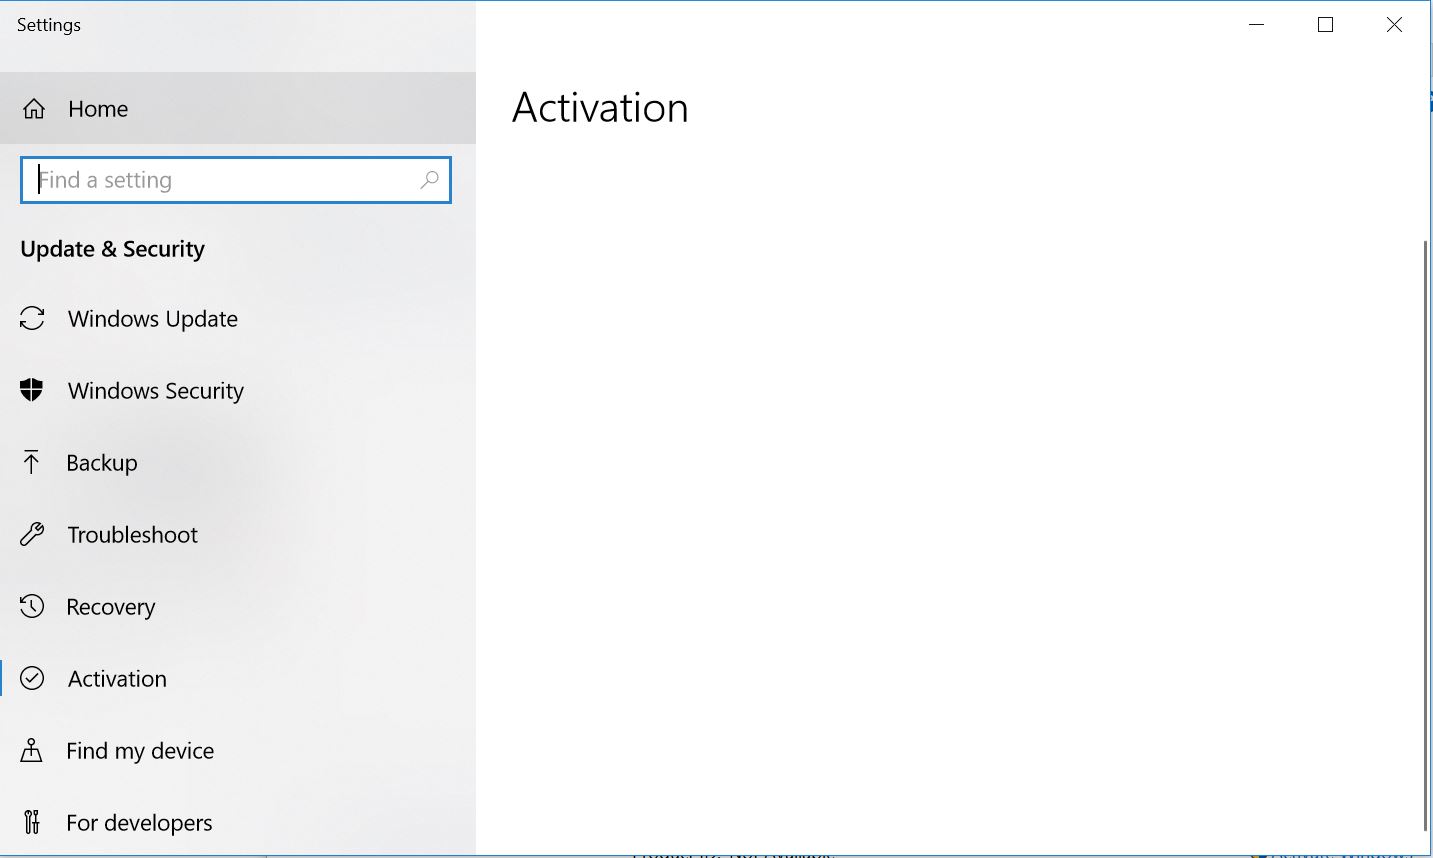 Windows 10 indicates not activated after restoring drive due to hardware failure 888945a9-8e99-4100-b3e5-f9cc042911bf?upload=true.jpg